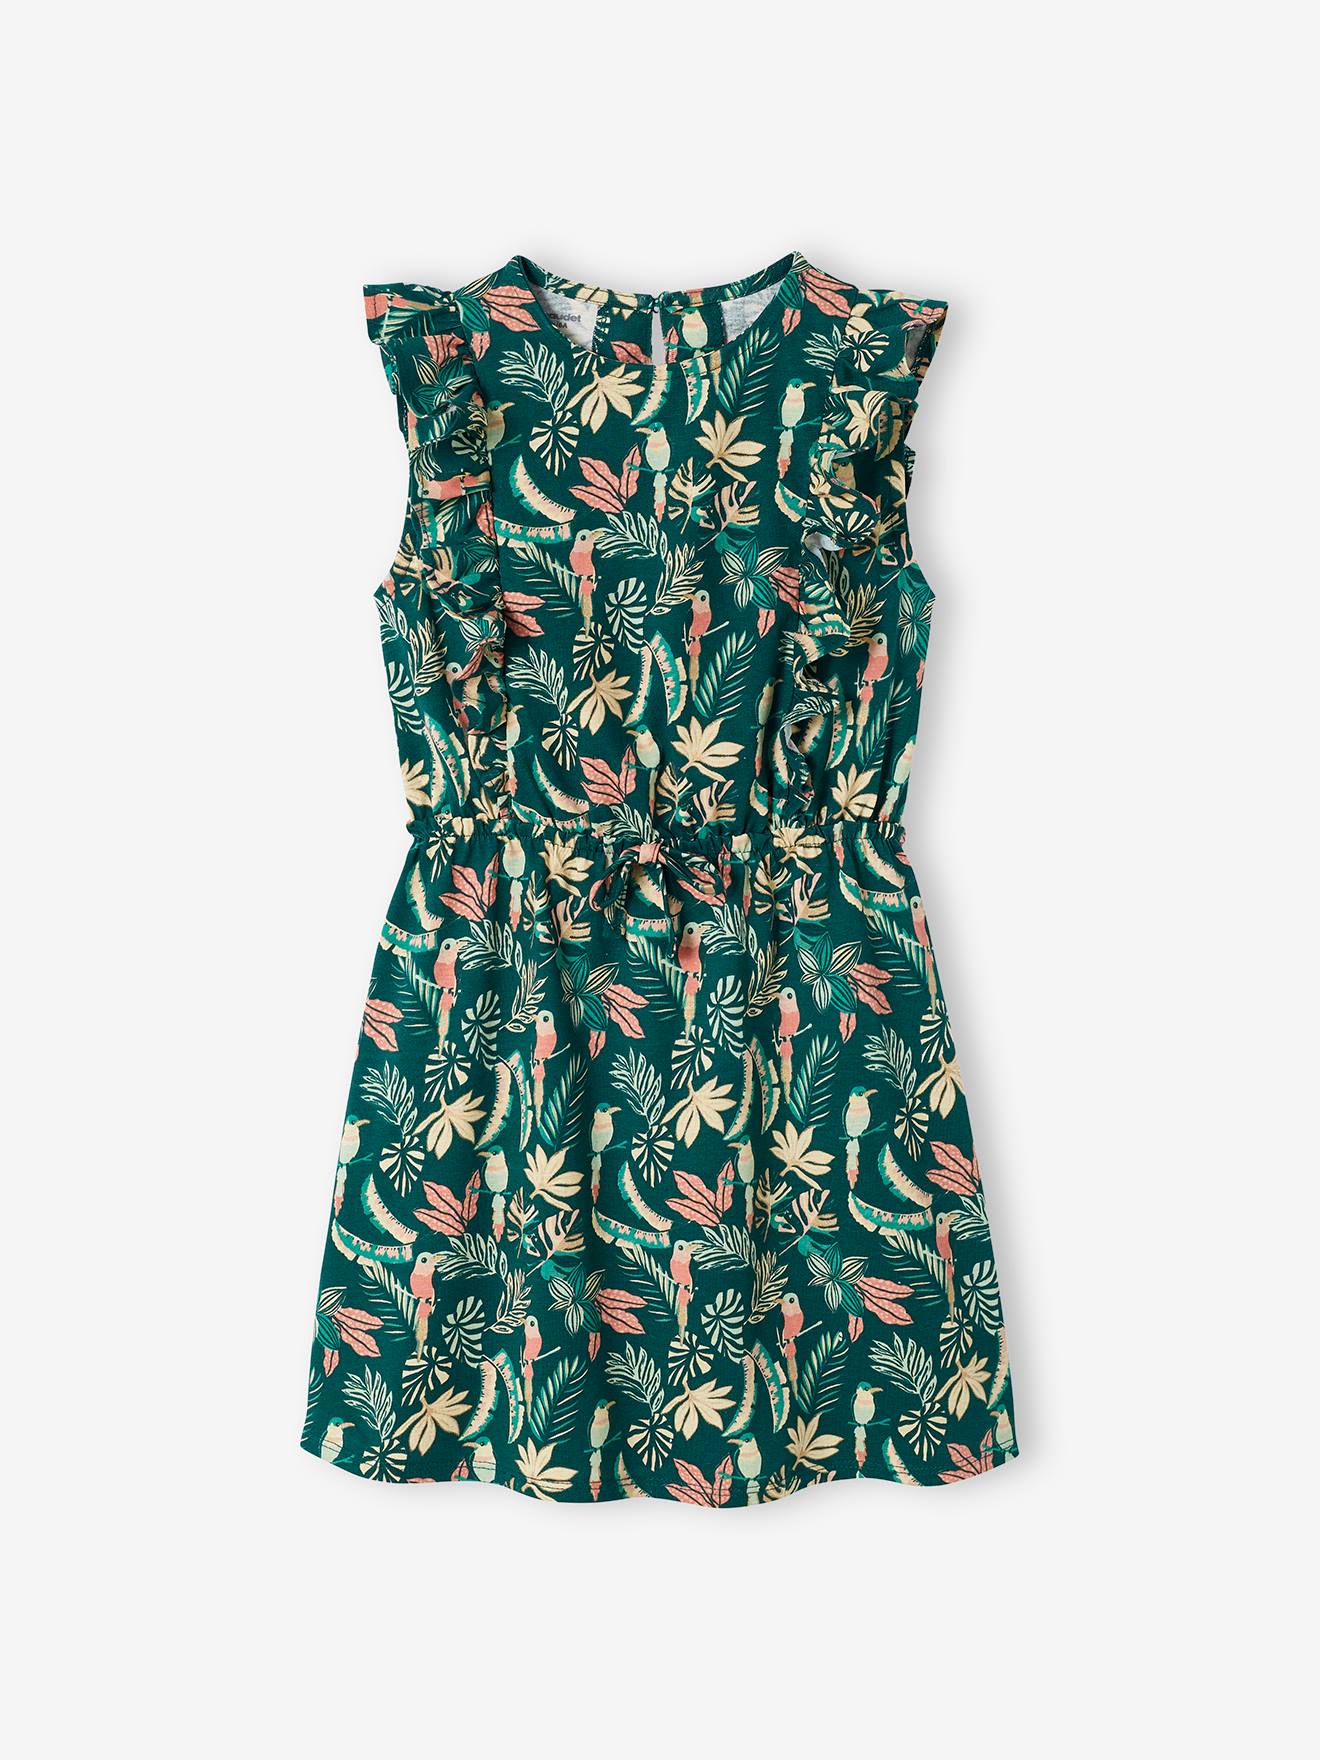 Printed Dress with Ruffles for Girls green dark all over printed